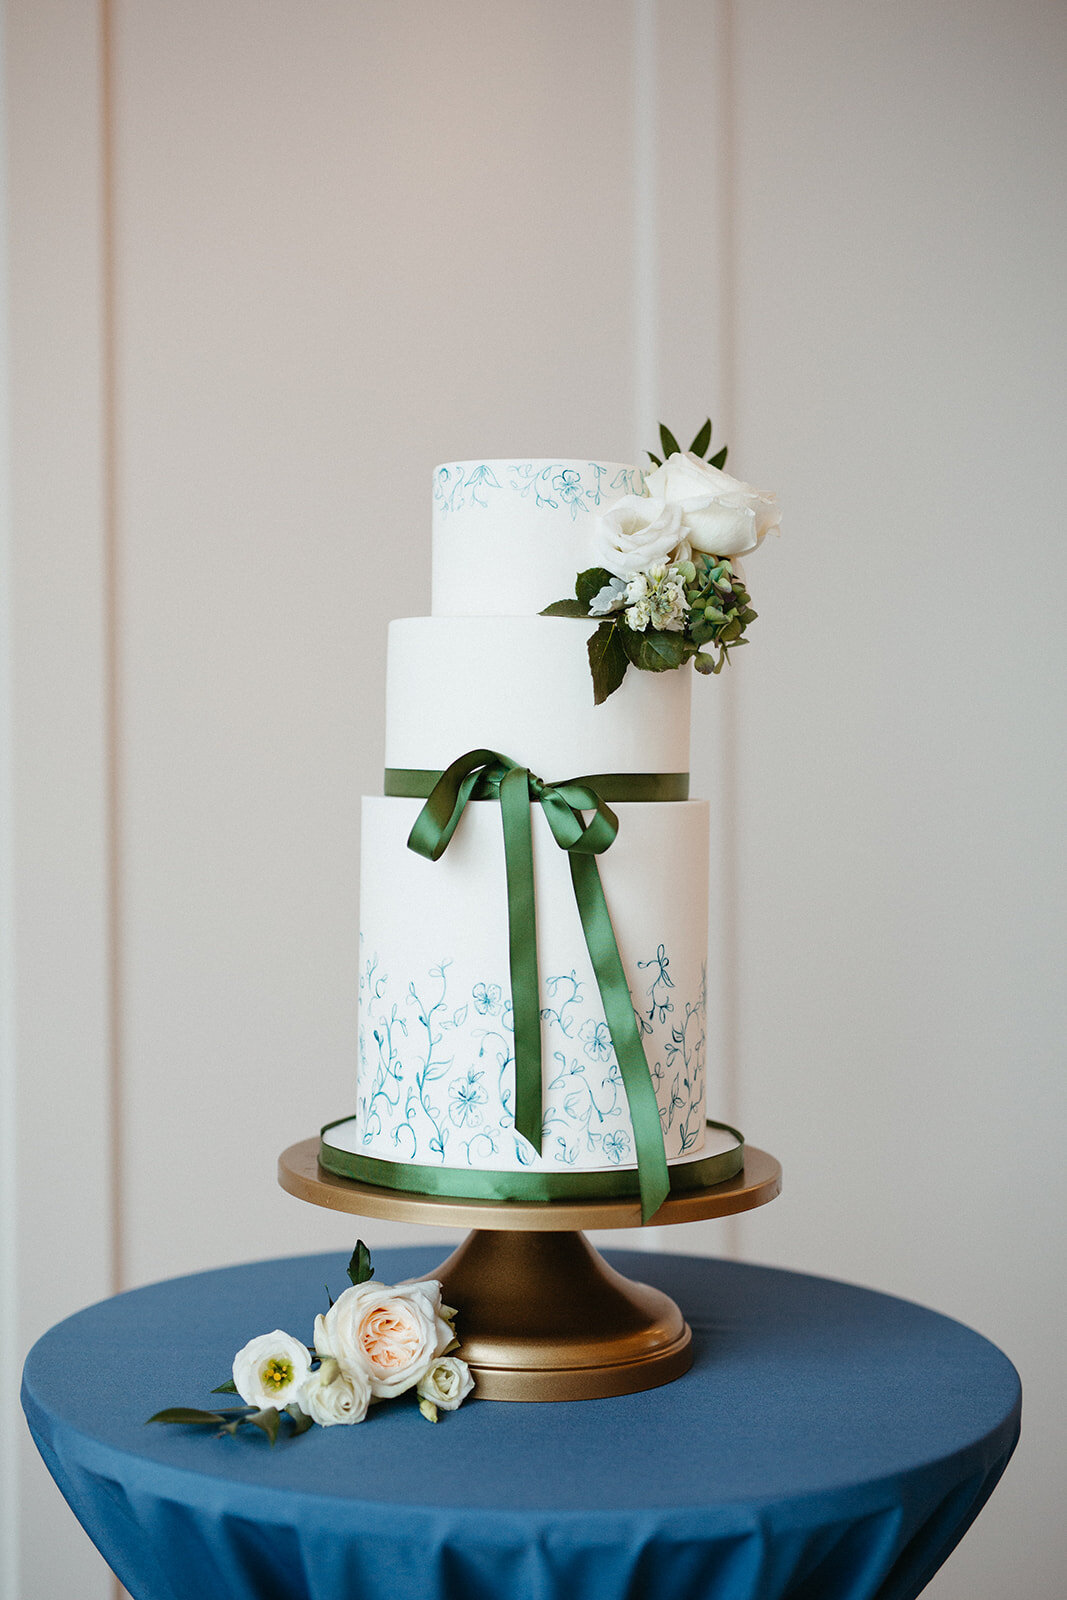 White cake with green ribbon and flowers on a gold cake stand atop a rounded table with blue linen.